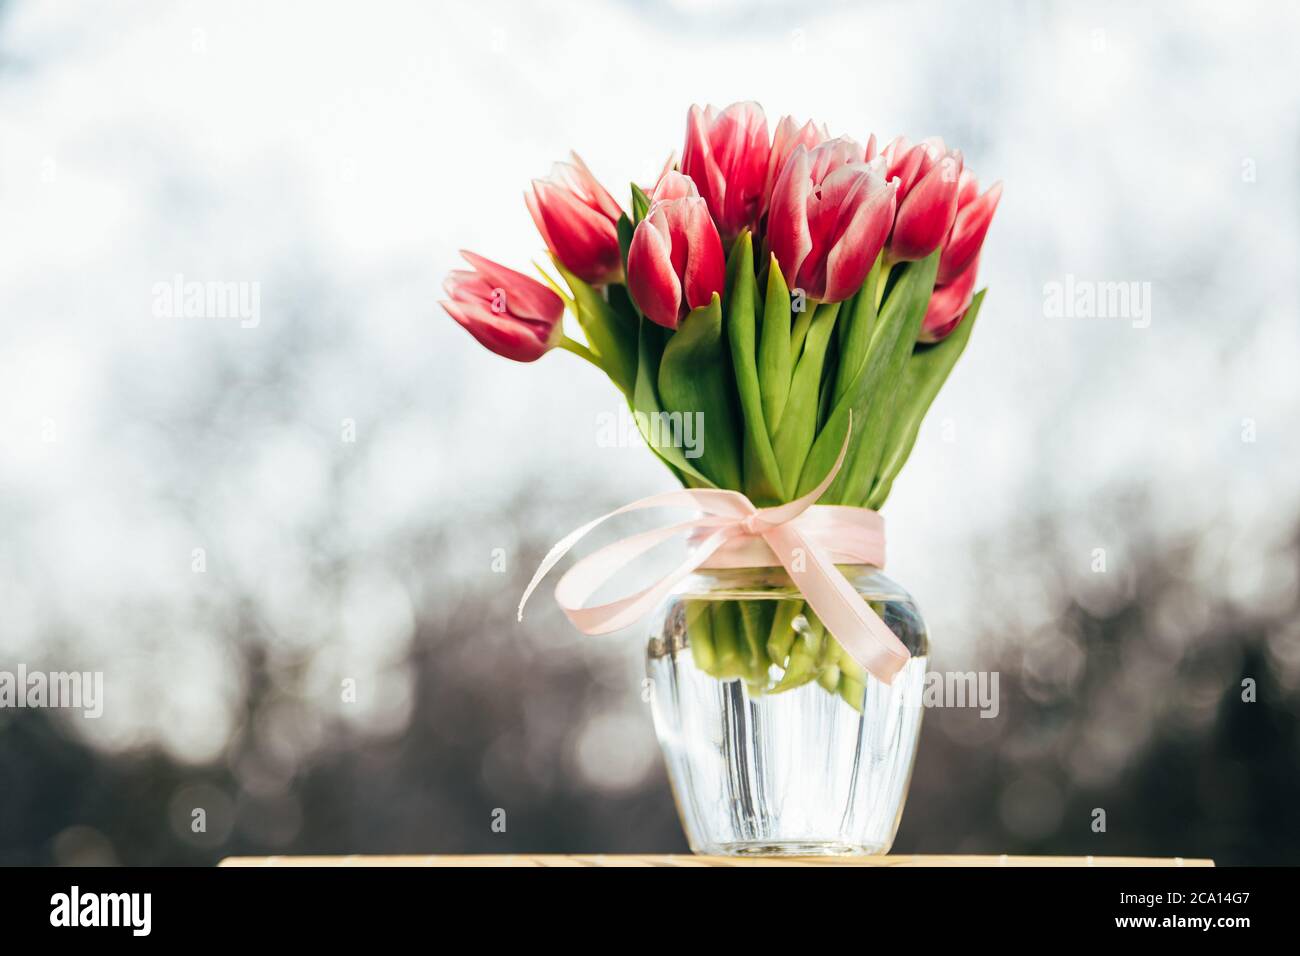 A bouquet of fresh pink tulips in a glass vase outdoors. Bunch of flowers Stock Photo